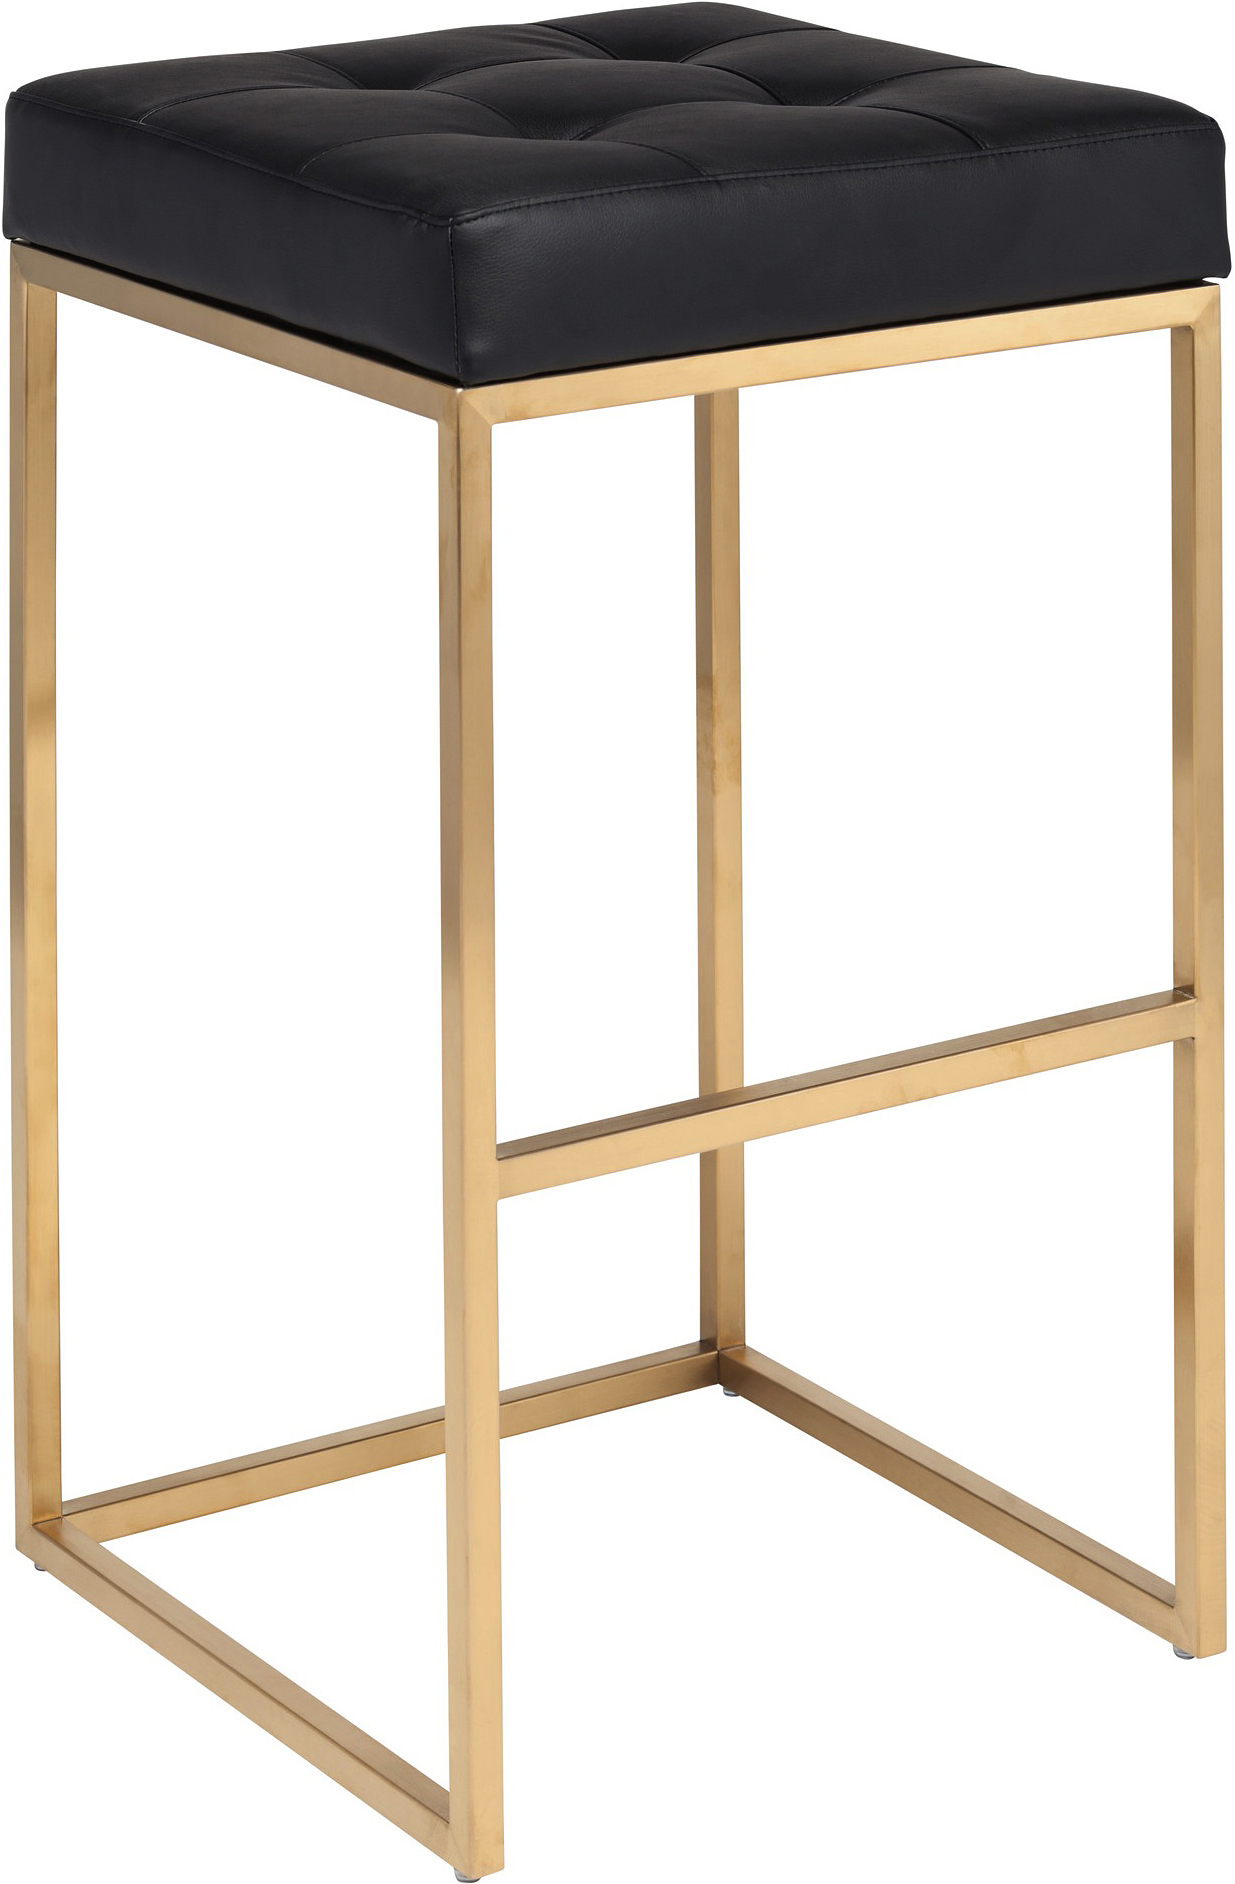 Chi Stool By Nuevo Living Is Available In Bar And Counter Height And Can Be Purchased At AdvancedInteriorDesigns.com. This stool comes with a brushed gold frame and with naugahyde leather either in black or white.